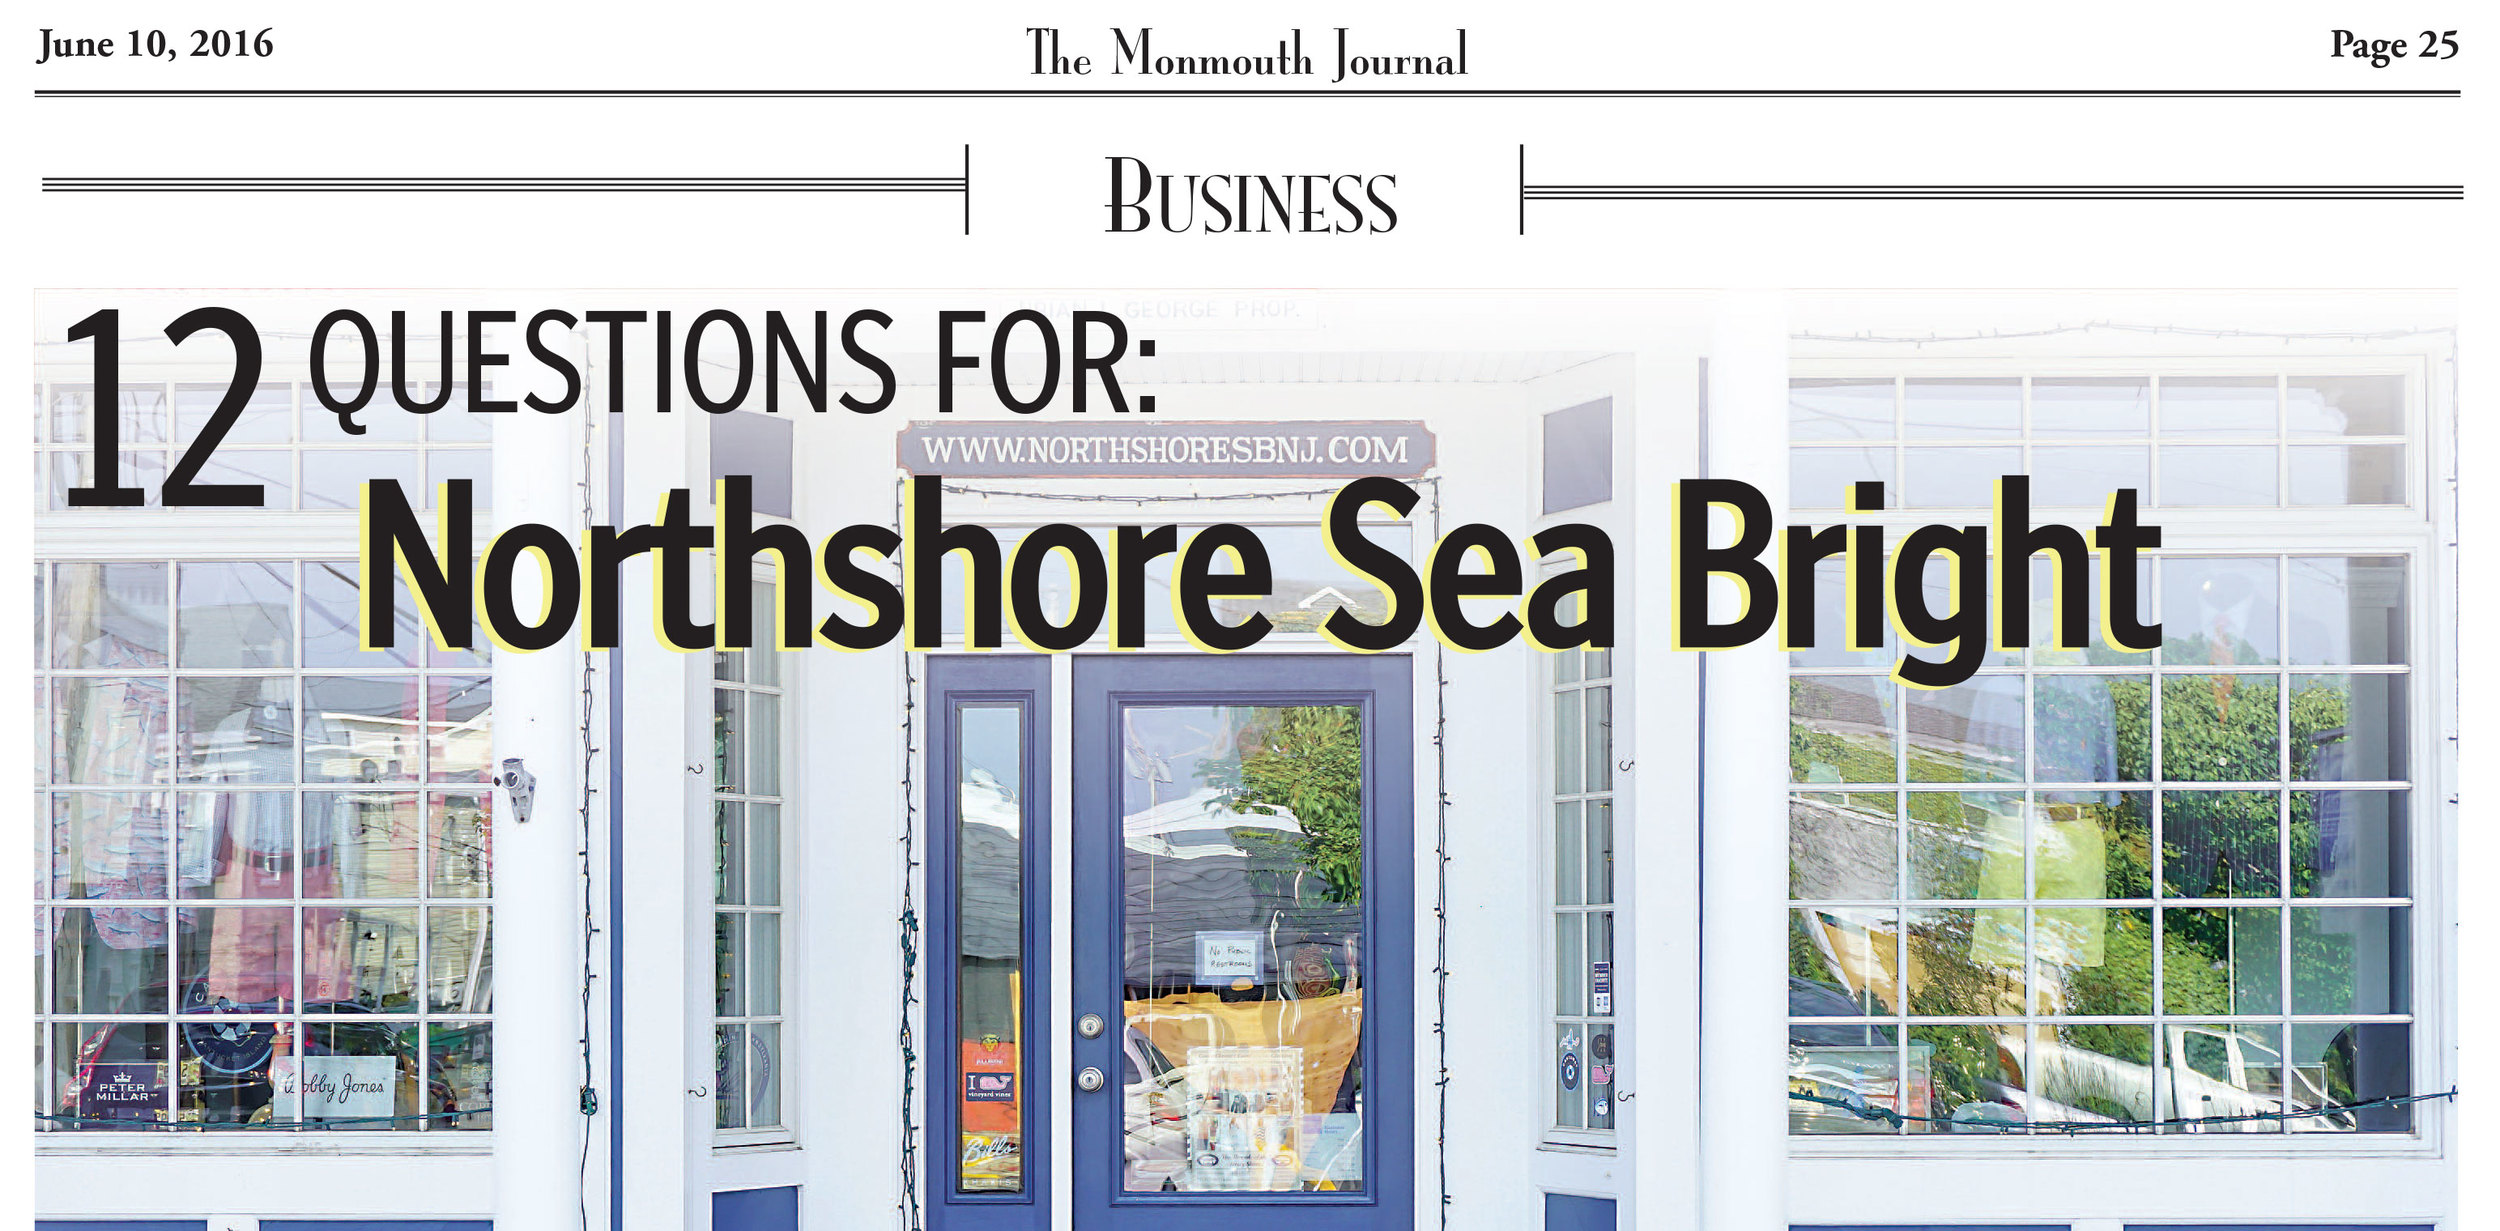 The Monmouth Journal - 12 Questions